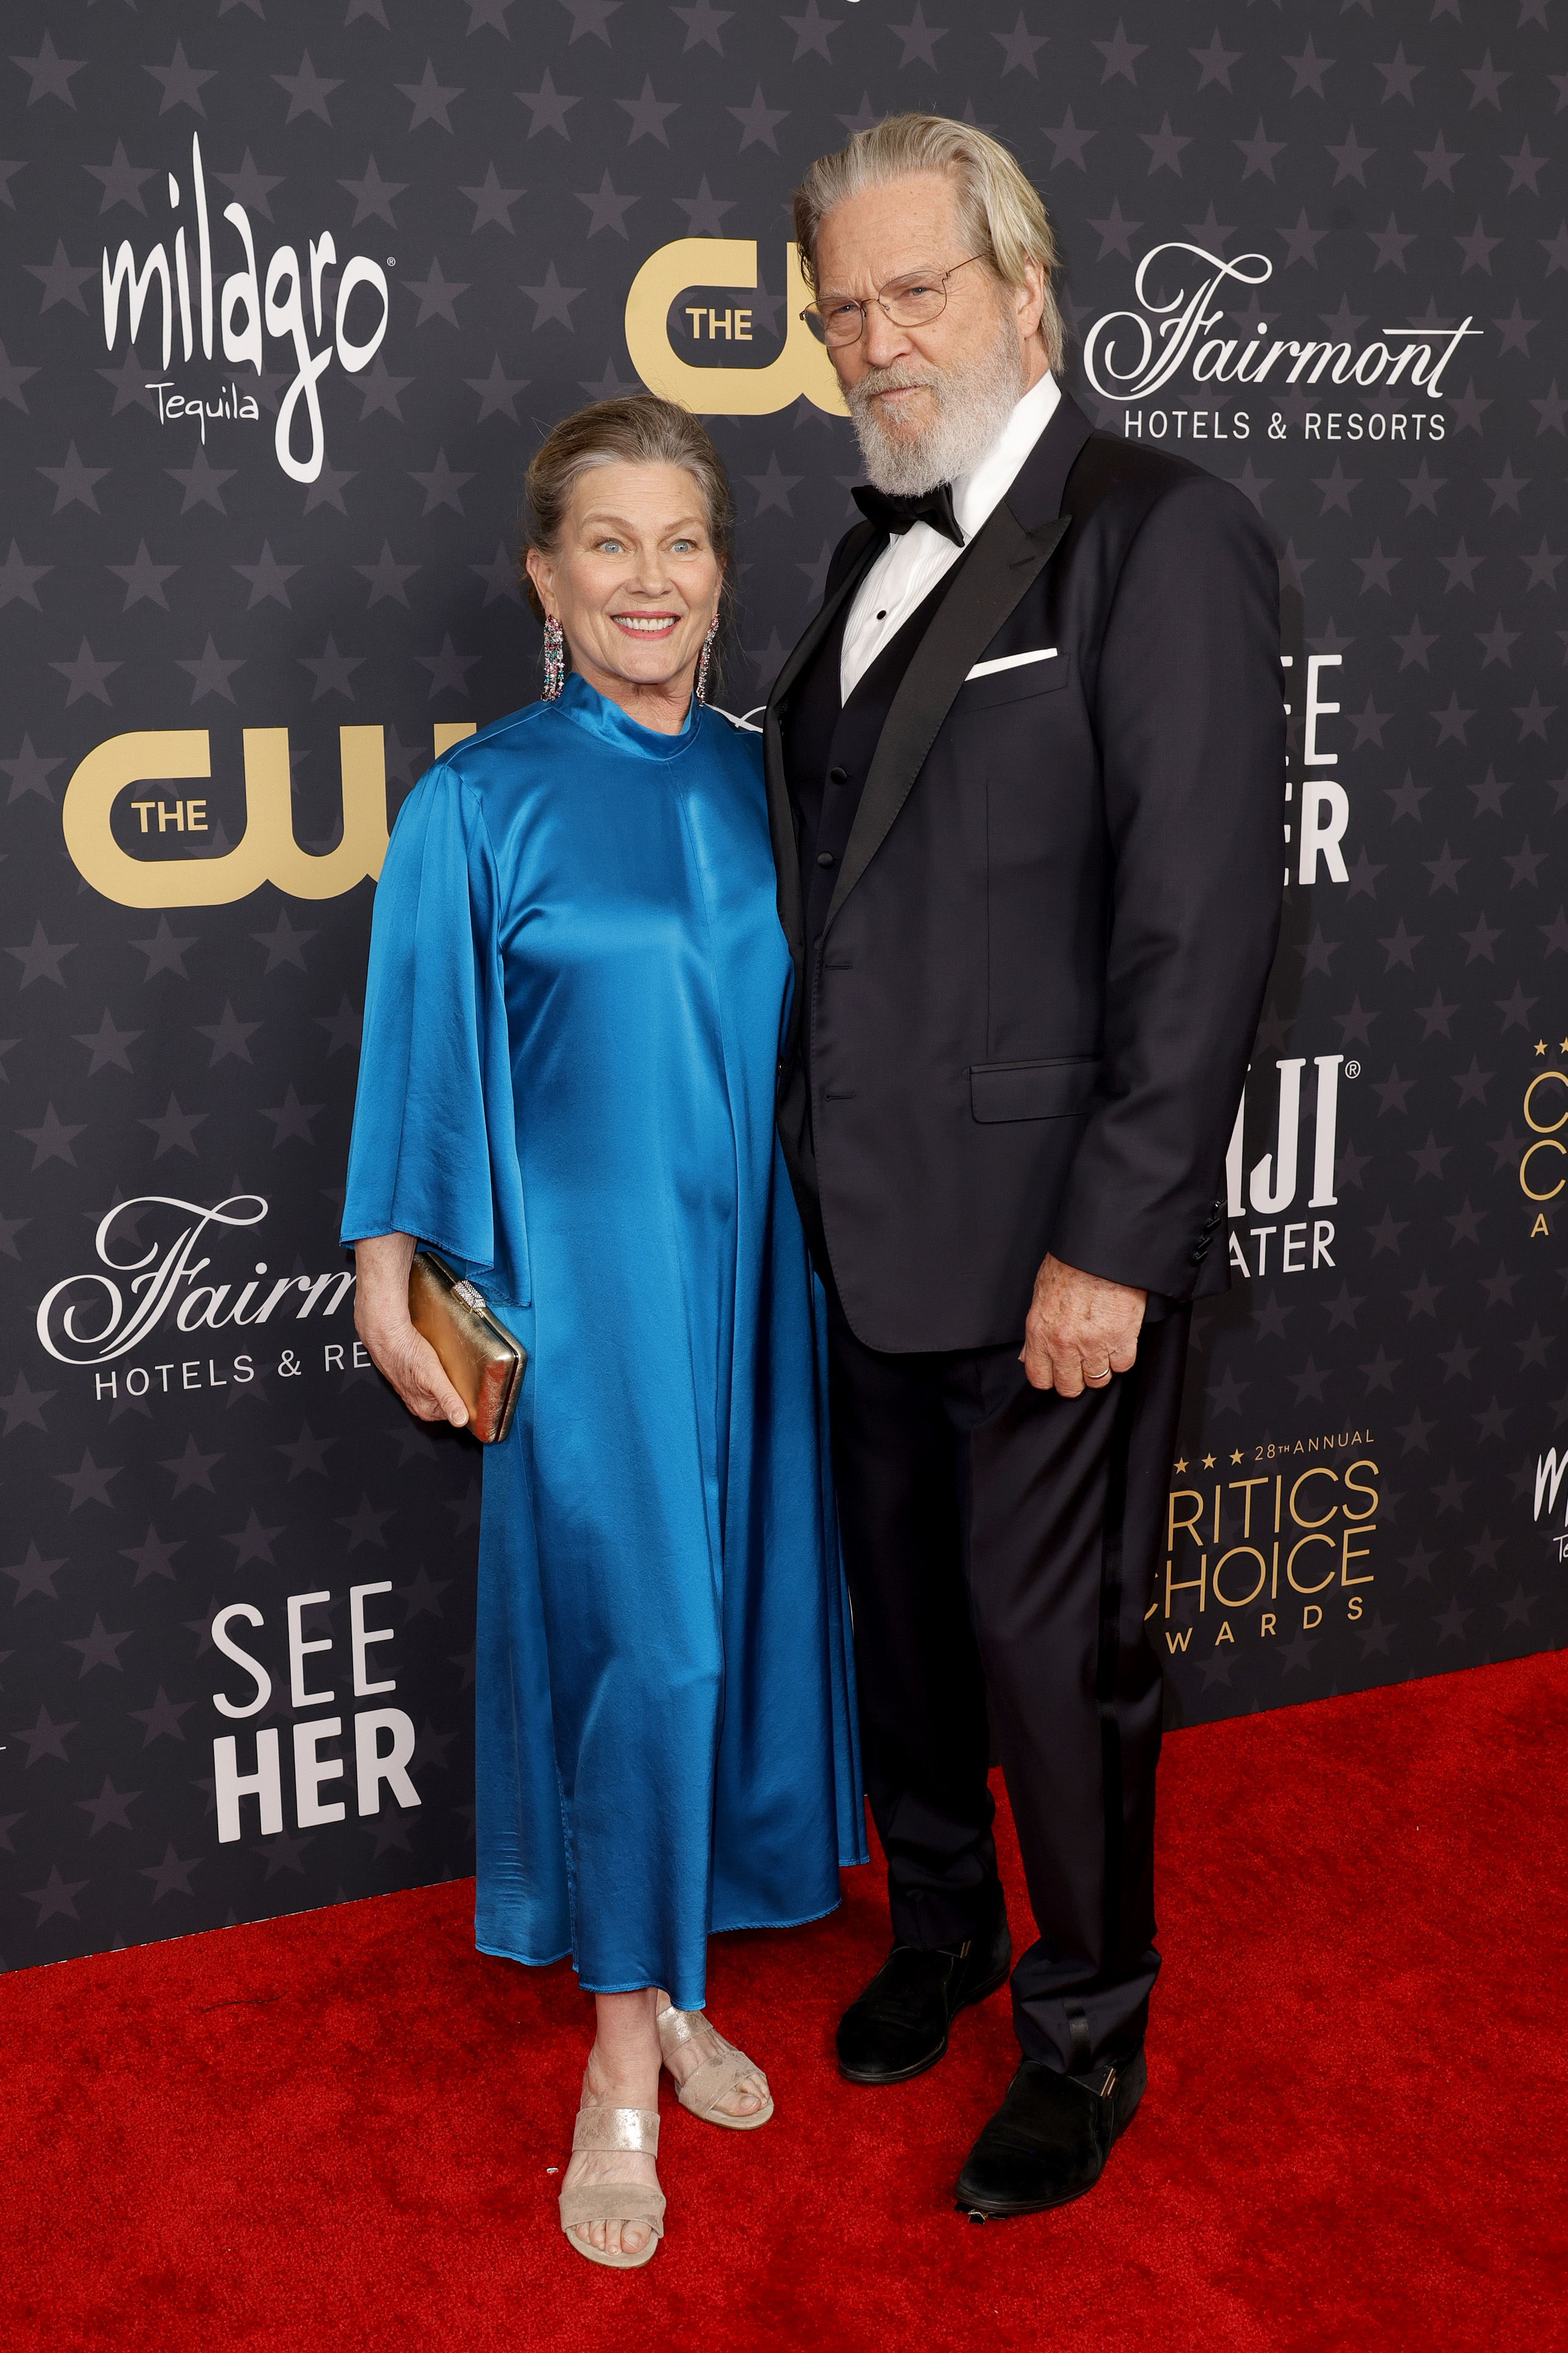 Susan and Jeff Bridges at the 28th Annual Critics Choice Awards on January 15, 2023, in Los Angeles, California | Source: Getty Images